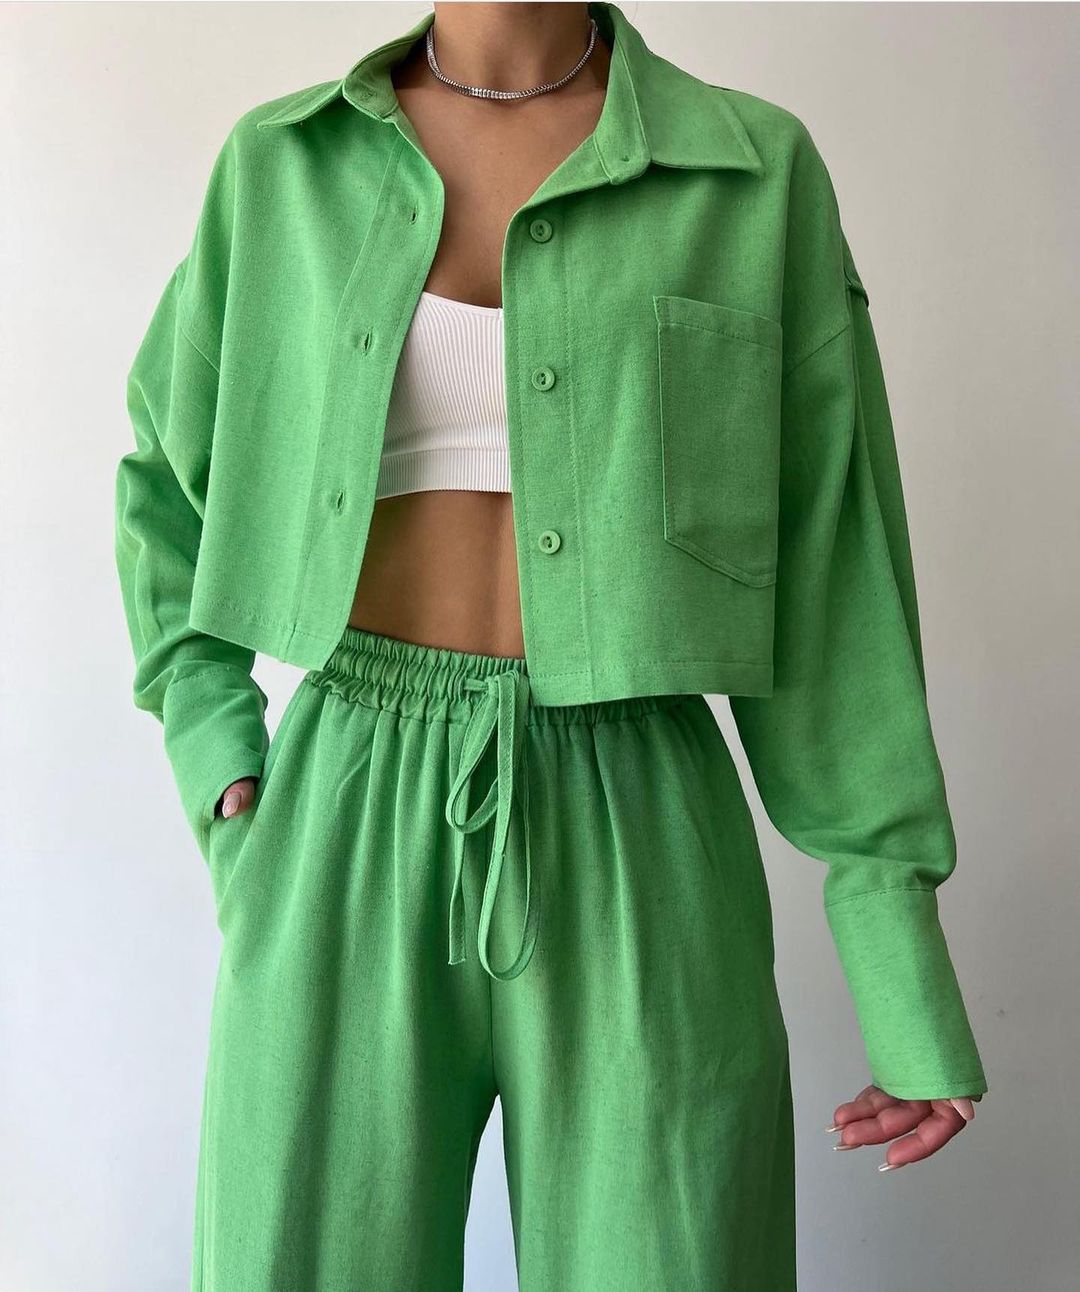 co-ord sets  | Women Two Piece Outfits For Women Long Sleeve Button Down Wide Leg Loungewear Pajama Set | Green |  2xl| thecurvestory.myshopify.com